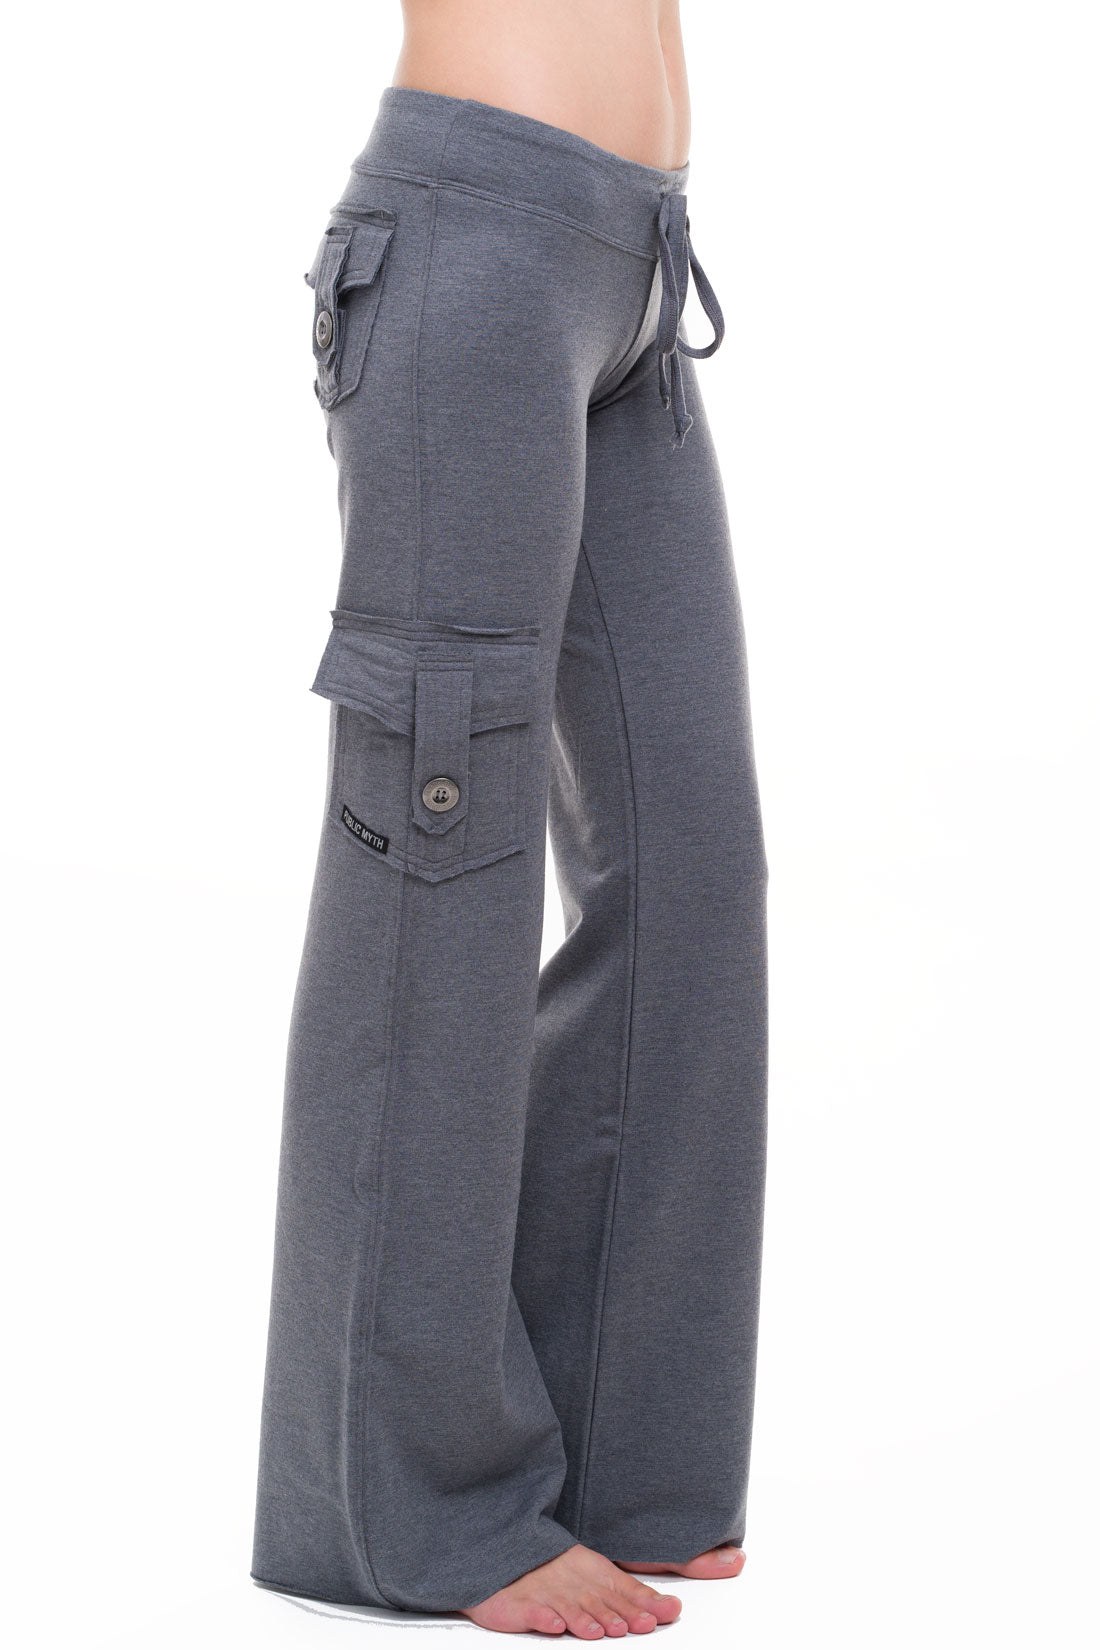 Bamboo Pocket Pants - ethical athleisure made in Canada! Flattering ...